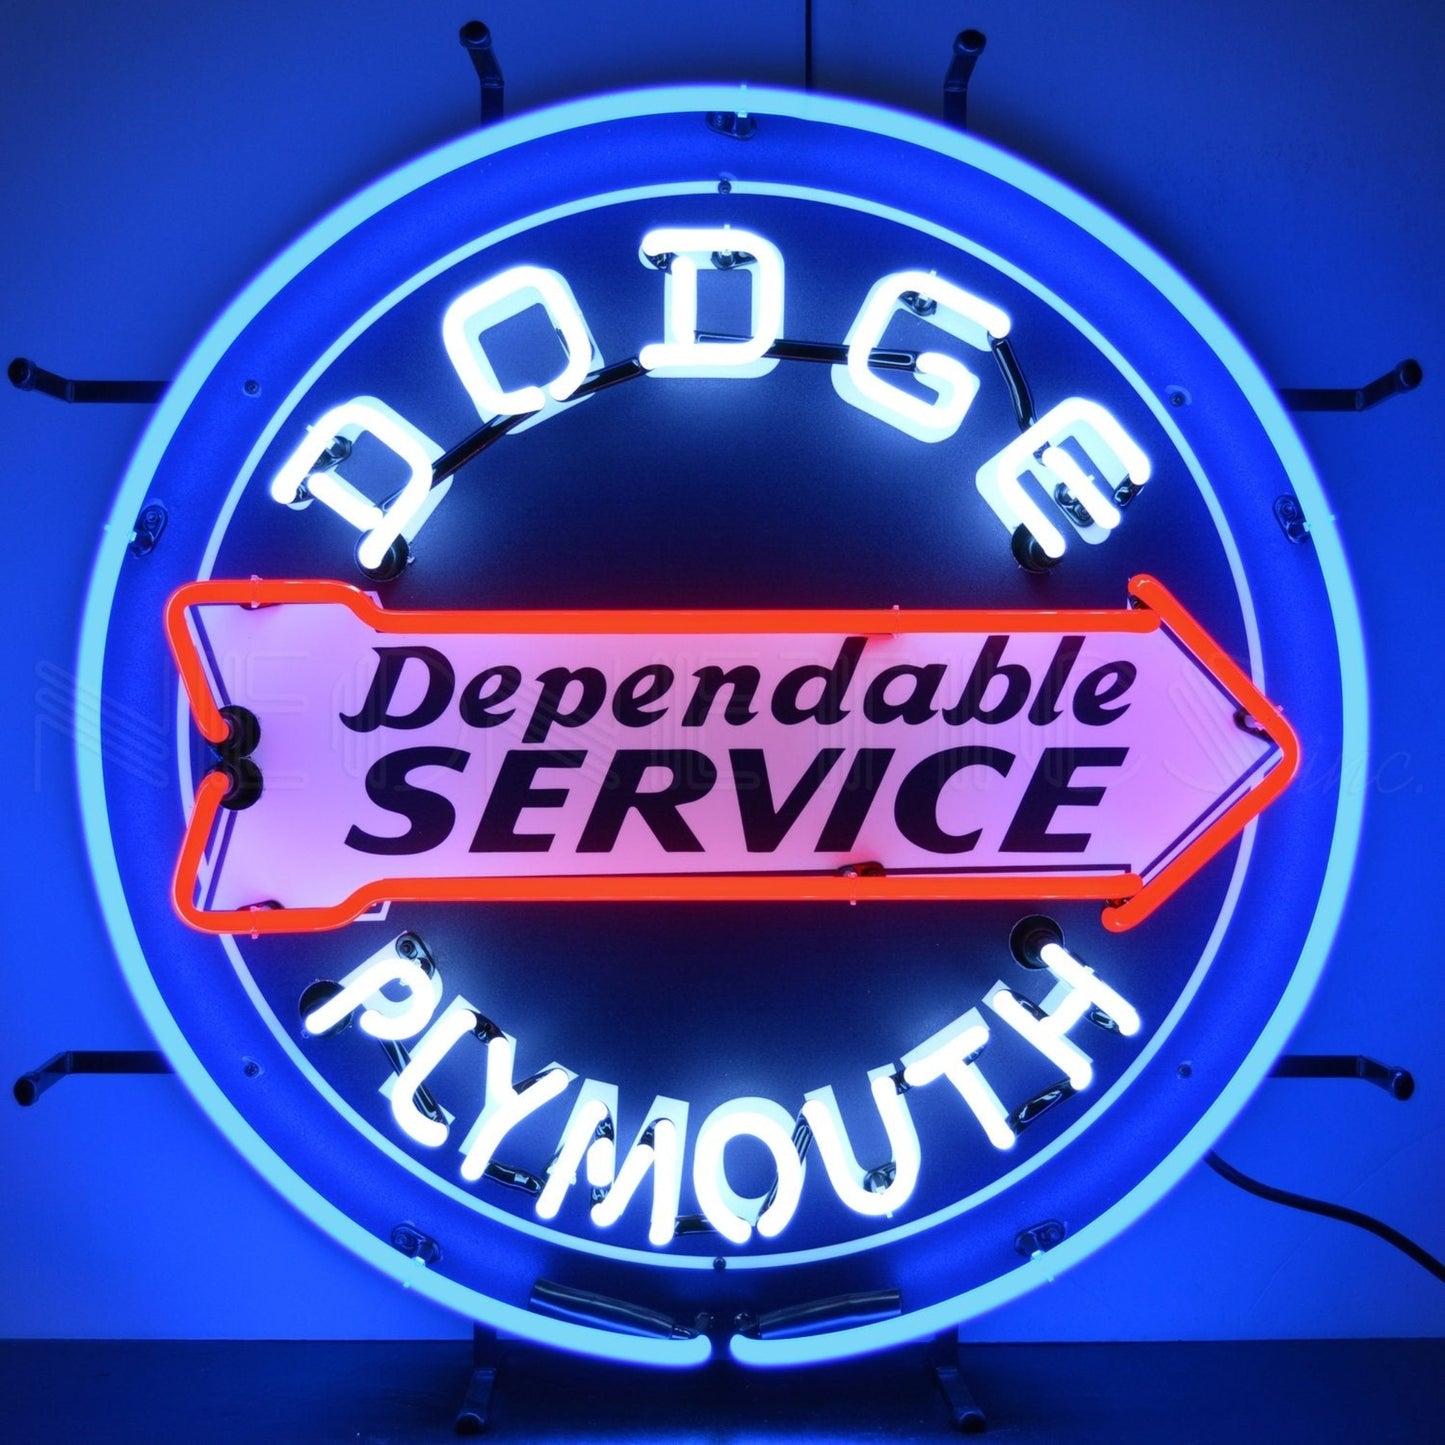 "Dodge Dependable Service" neon sign with blue and red colors.